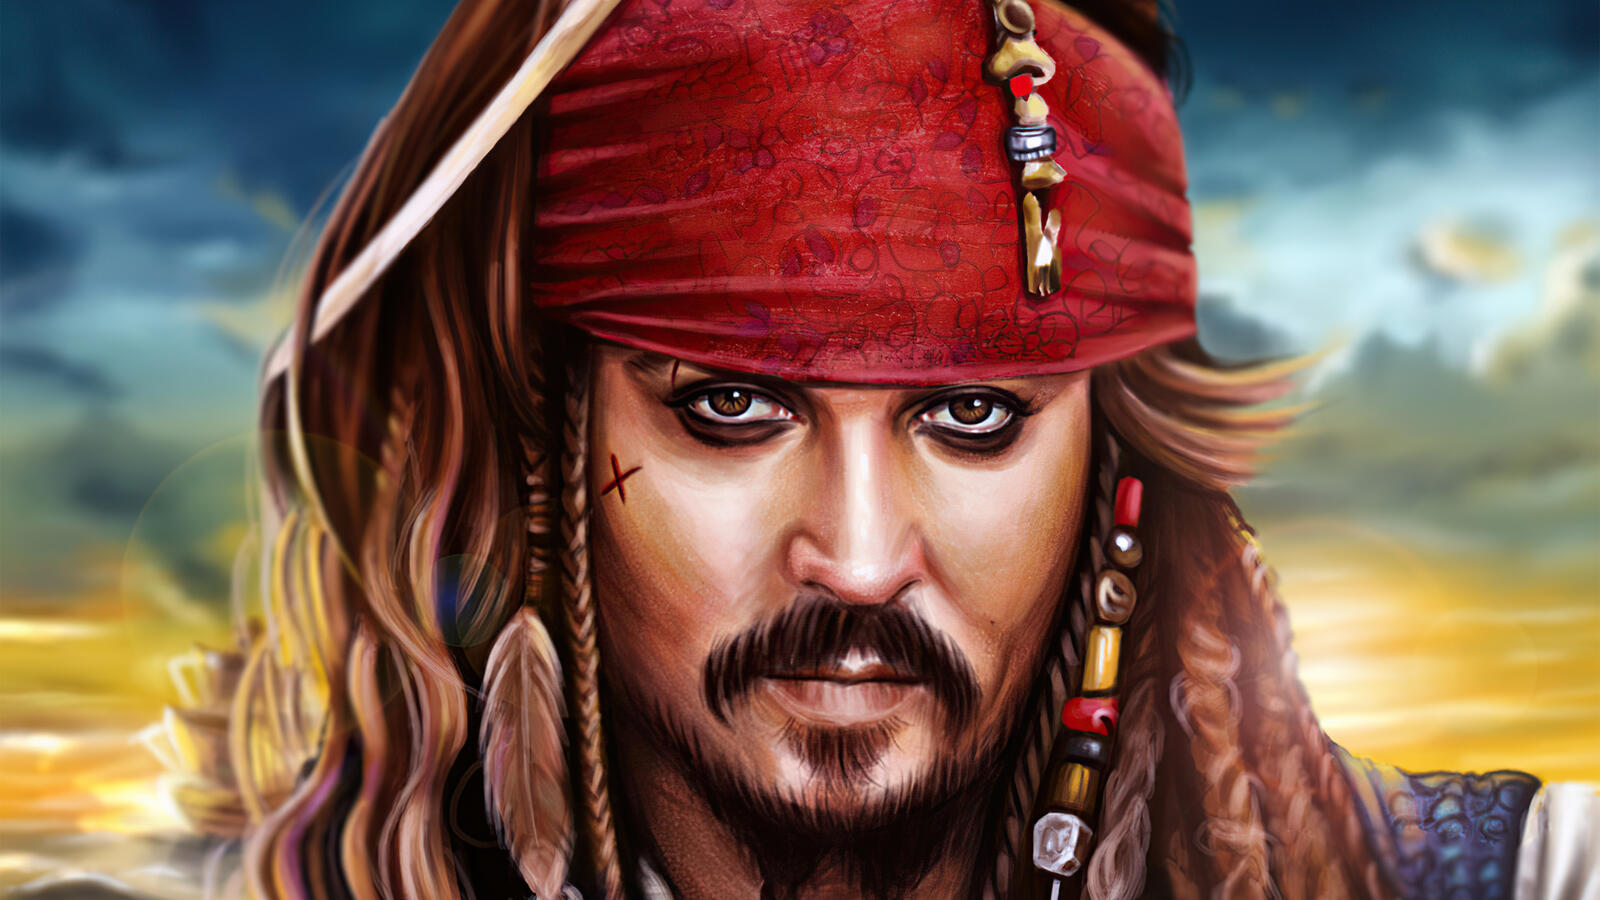 Wallpapers jack sparrow movies actor on the desktop